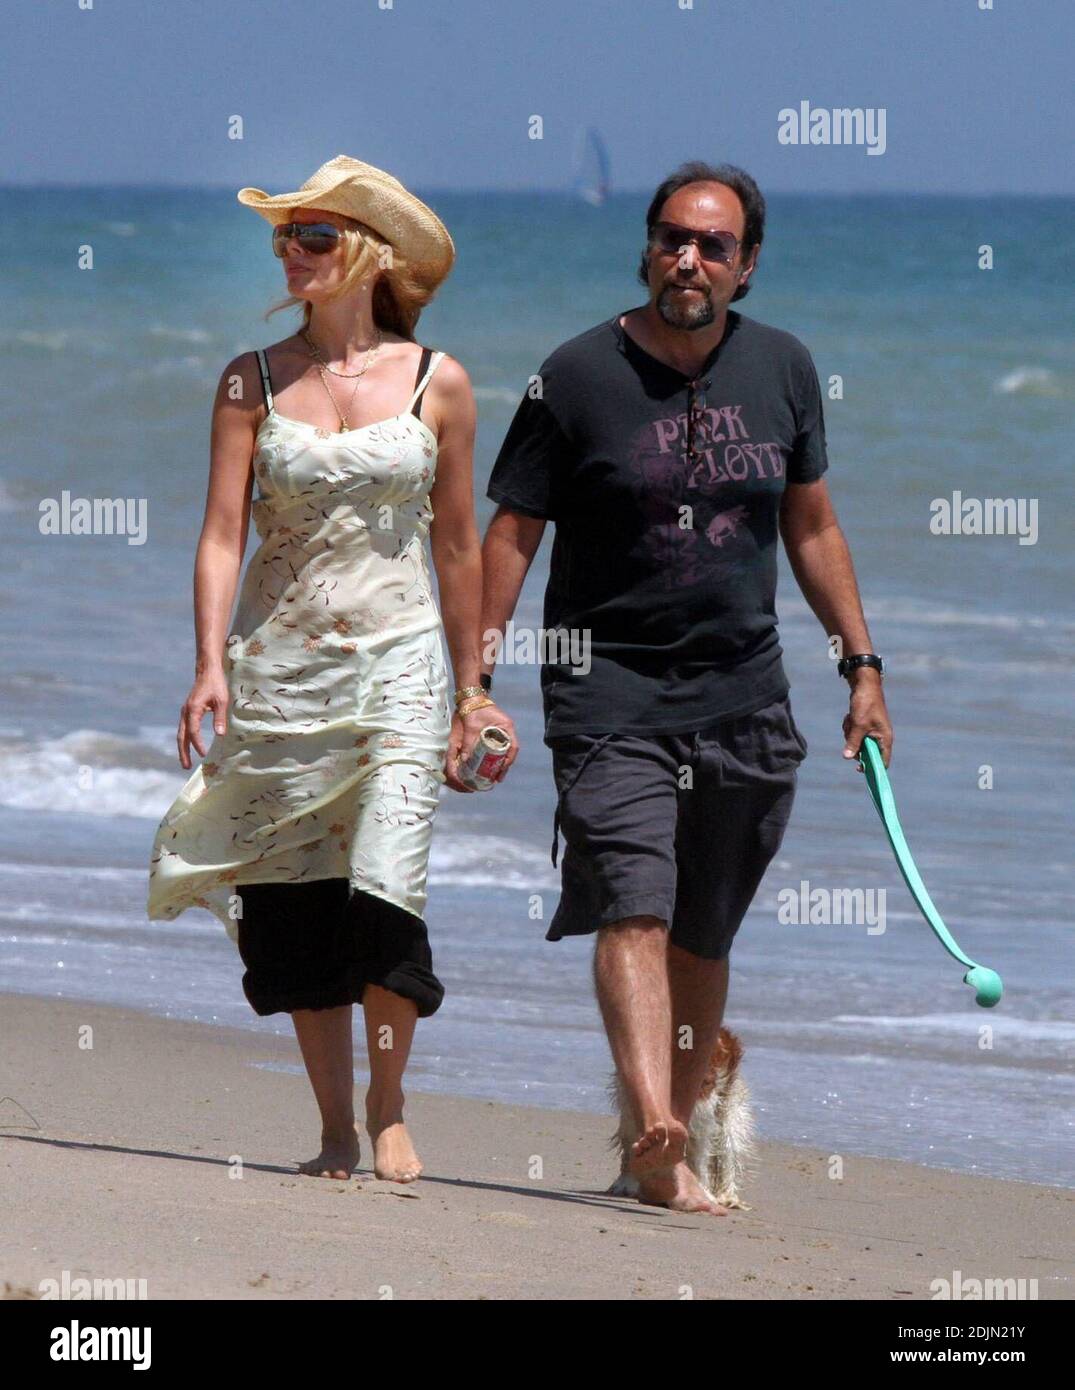 Rosanna Arquette takes a stroll on the beach with a friend while playing  fetch with some dogs. Perhaps the actress is litter-conscious, as she  appears to be toting away a canister of